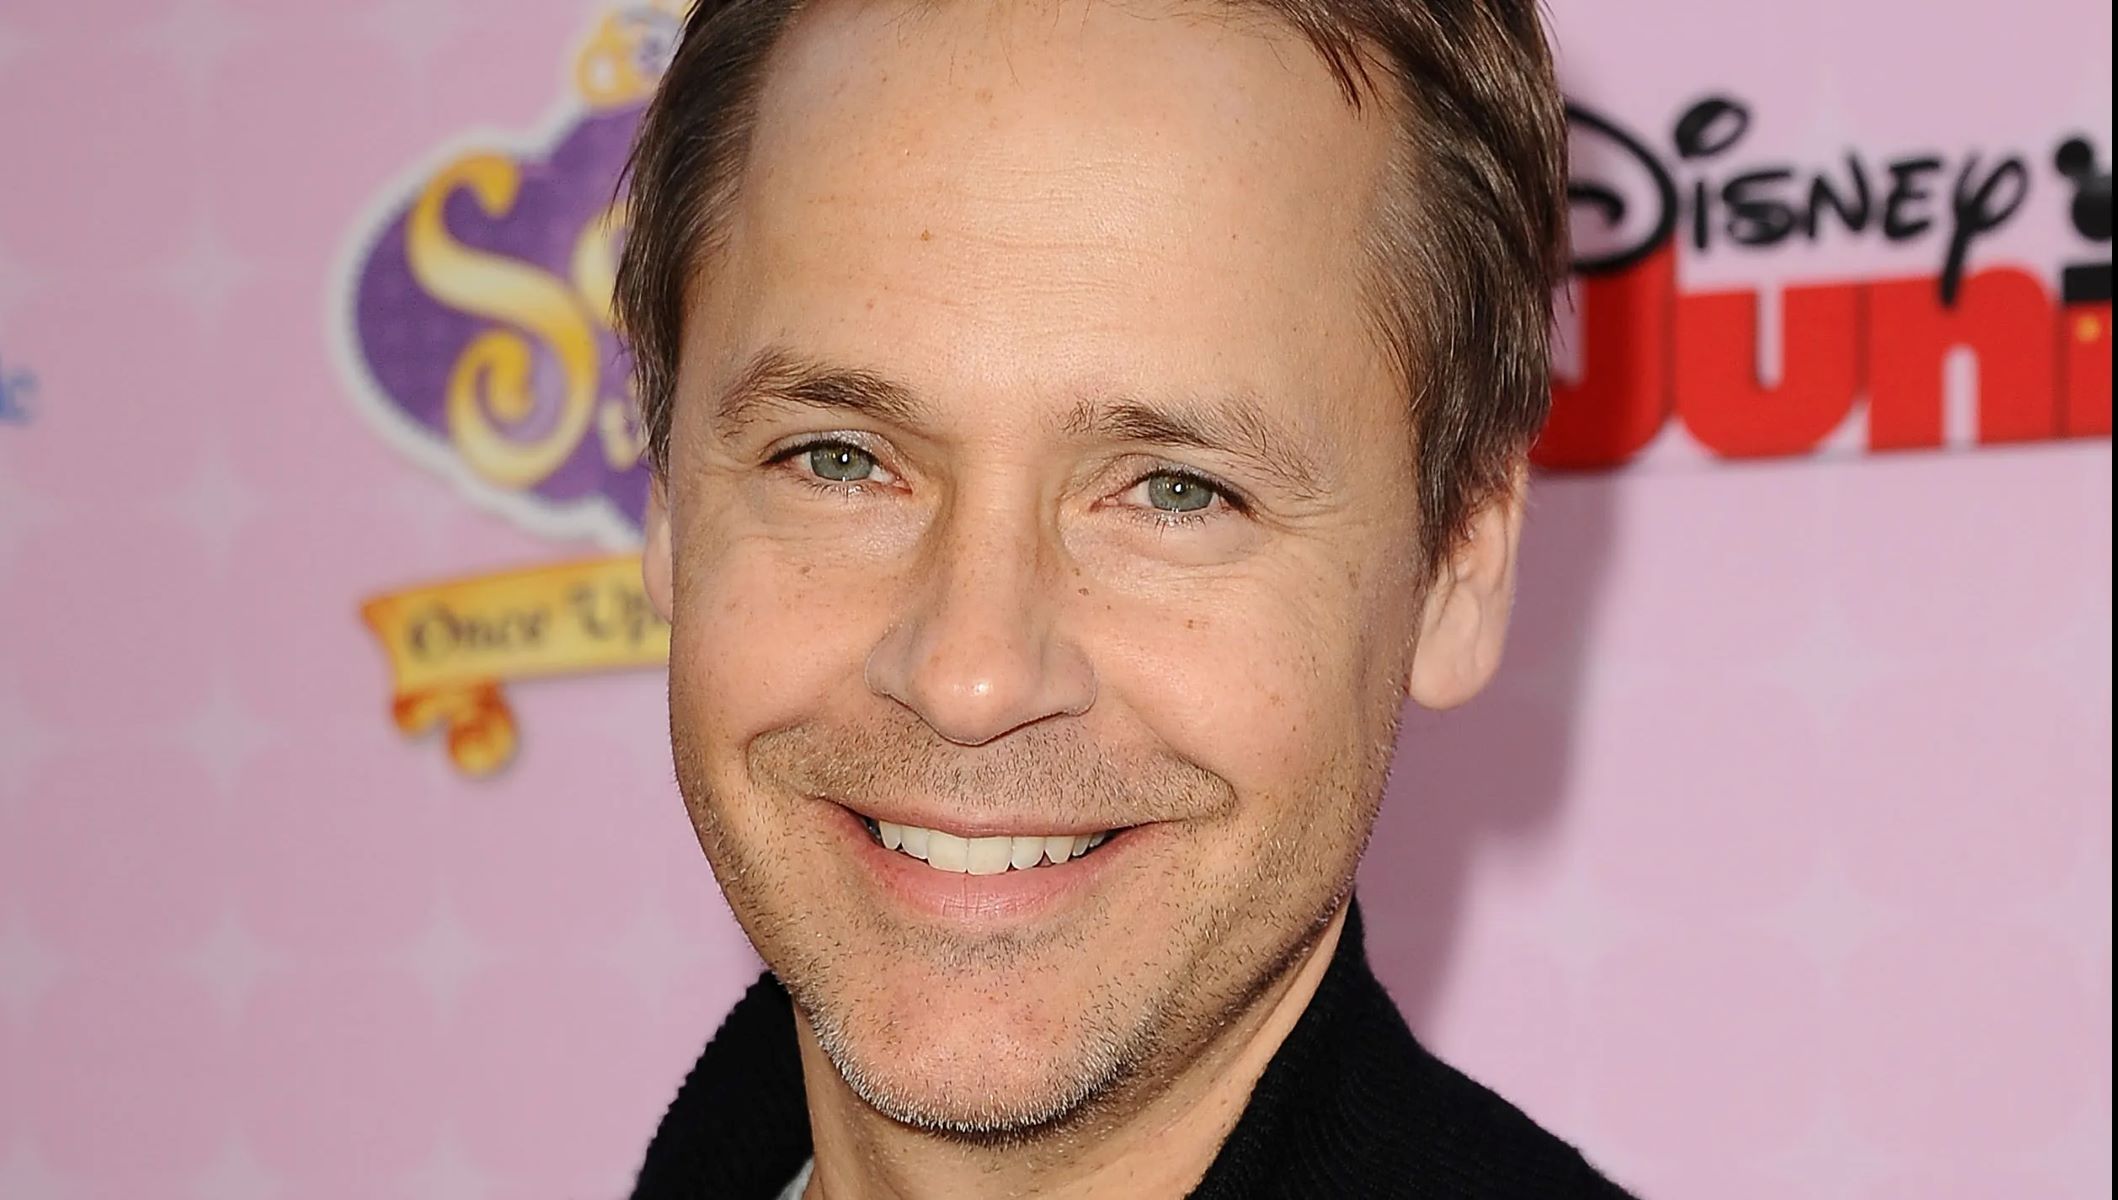 19 Unbelievable Facts About Chad Lowe - Facts.net